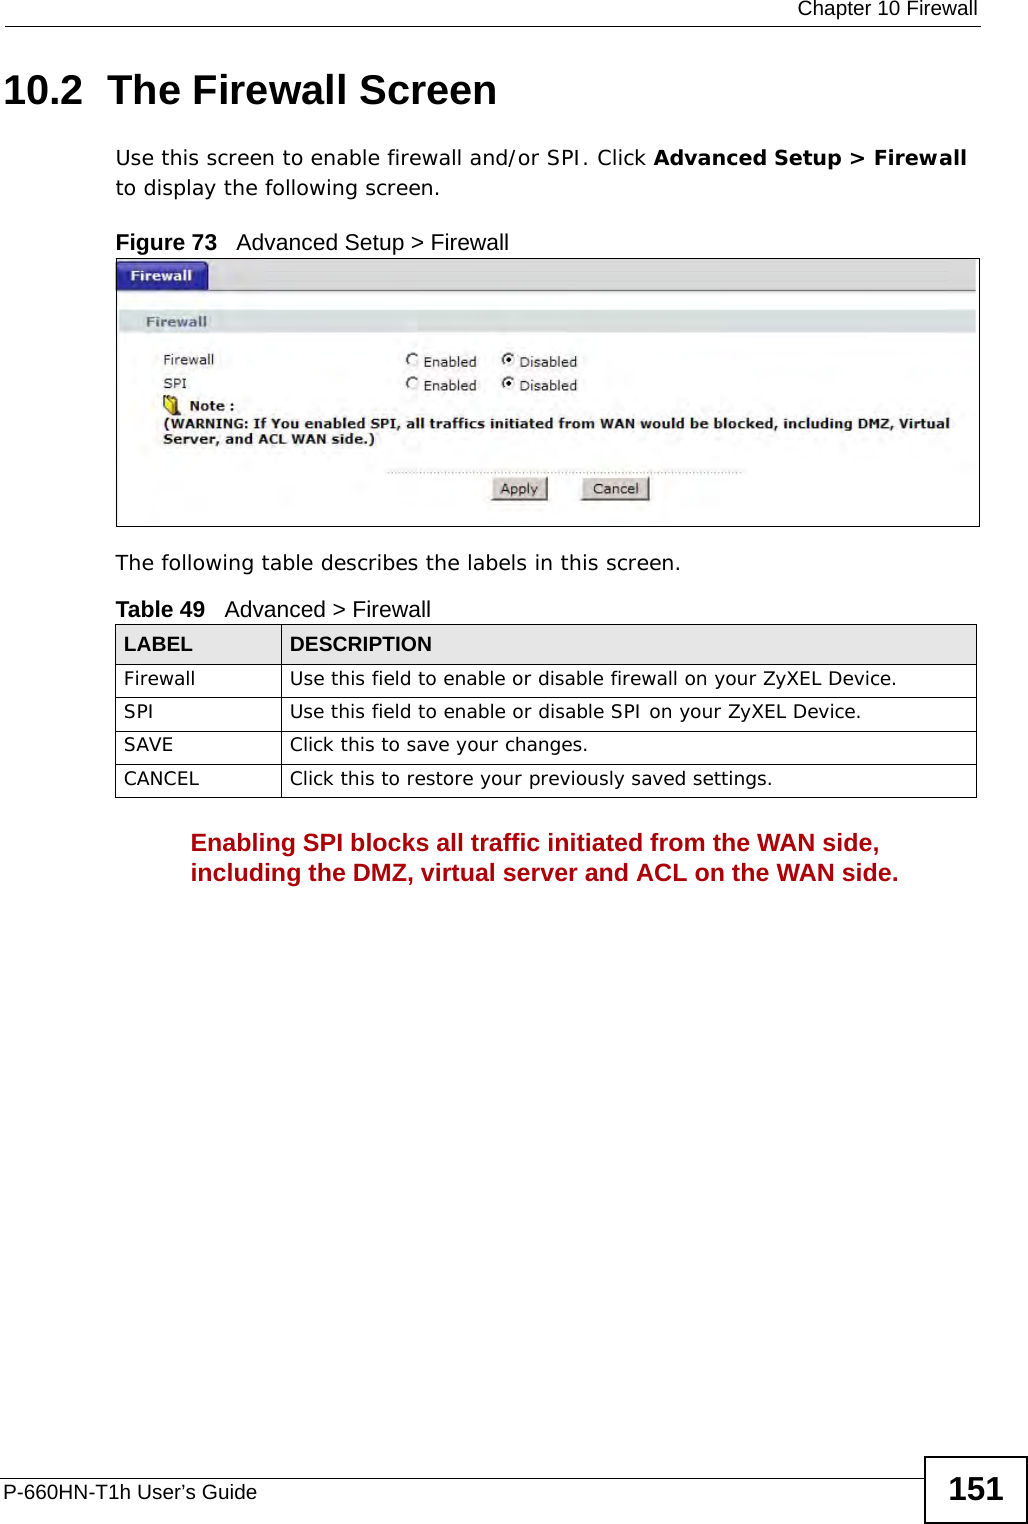  Chapter 10 FirewallP-660HN-T1h User’s Guide 15110.2  The Firewall ScreenUse this screen to enable firewall and/or SPI. Click Advanced Setup &gt; Firewall to display the following screen.Figure 73   Advanced Setup &gt; FirewallThe following table describes the labels in this screen.Enabling SPI blocks all traffic initiated from the WAN side, including the DMZ, virtual server and ACL on the WAN side.Table 49   Advanced &gt; FirewallLABEL DESCRIPTIONFirewall Use this field to enable or disable firewall on your ZyXEL Device.SPI Use this field to enable or disable SPI on your ZyXEL Device.SAVE Click this to save your changes.CANCEL Click this to restore your previously saved settings.